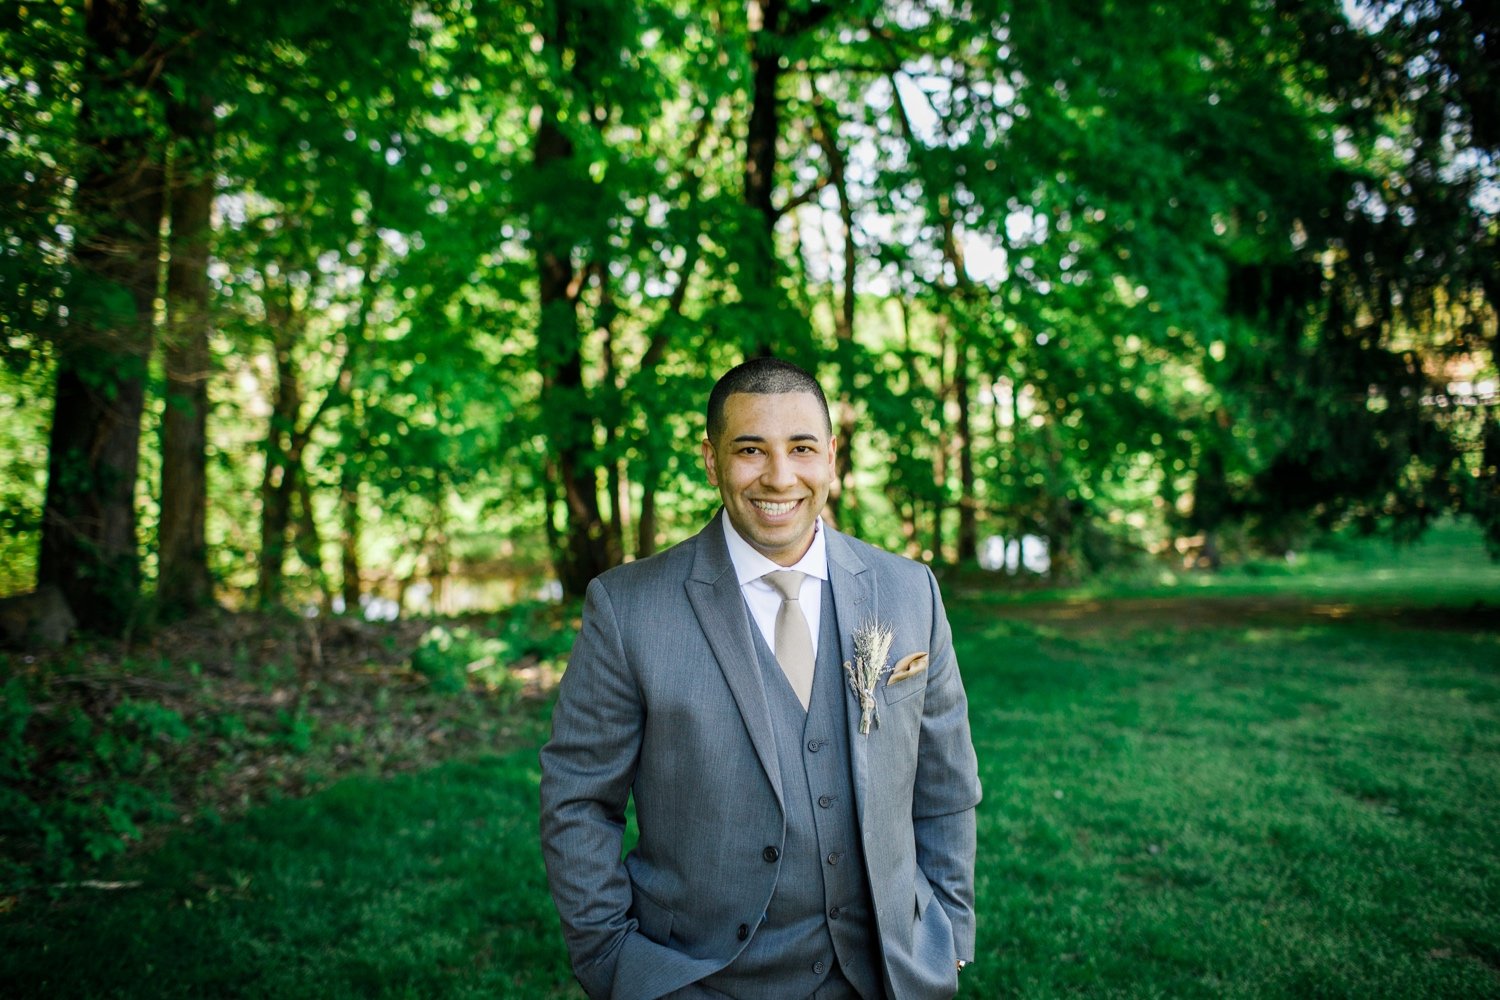 17_Groom portraits at Otterkill Golf and Country Club by Sweet Alice Photography.jpg